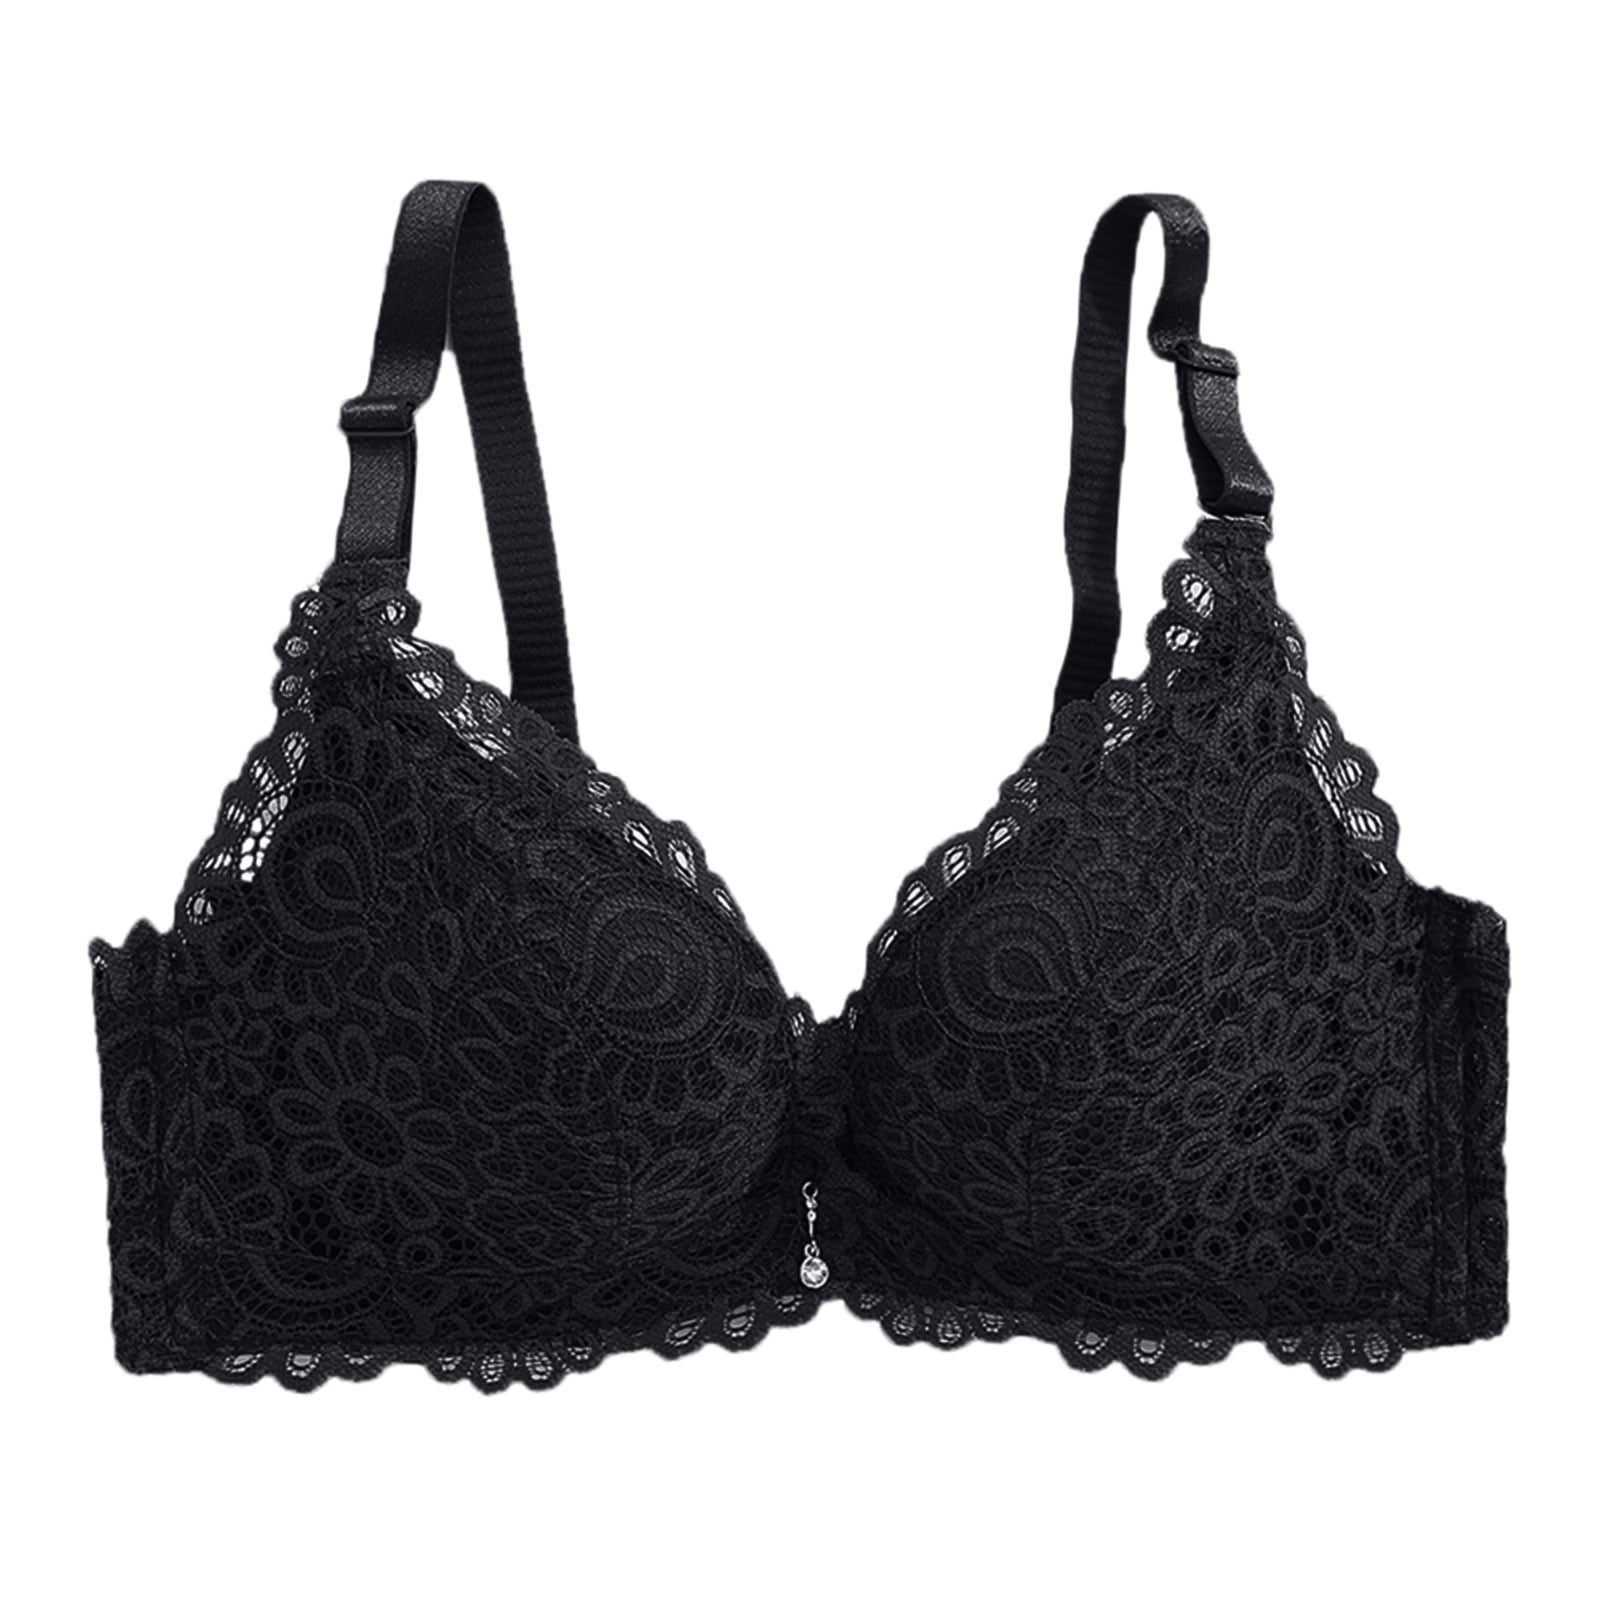 nsendm Lace Lingerie Wireless Bra For Women Padded Push Up